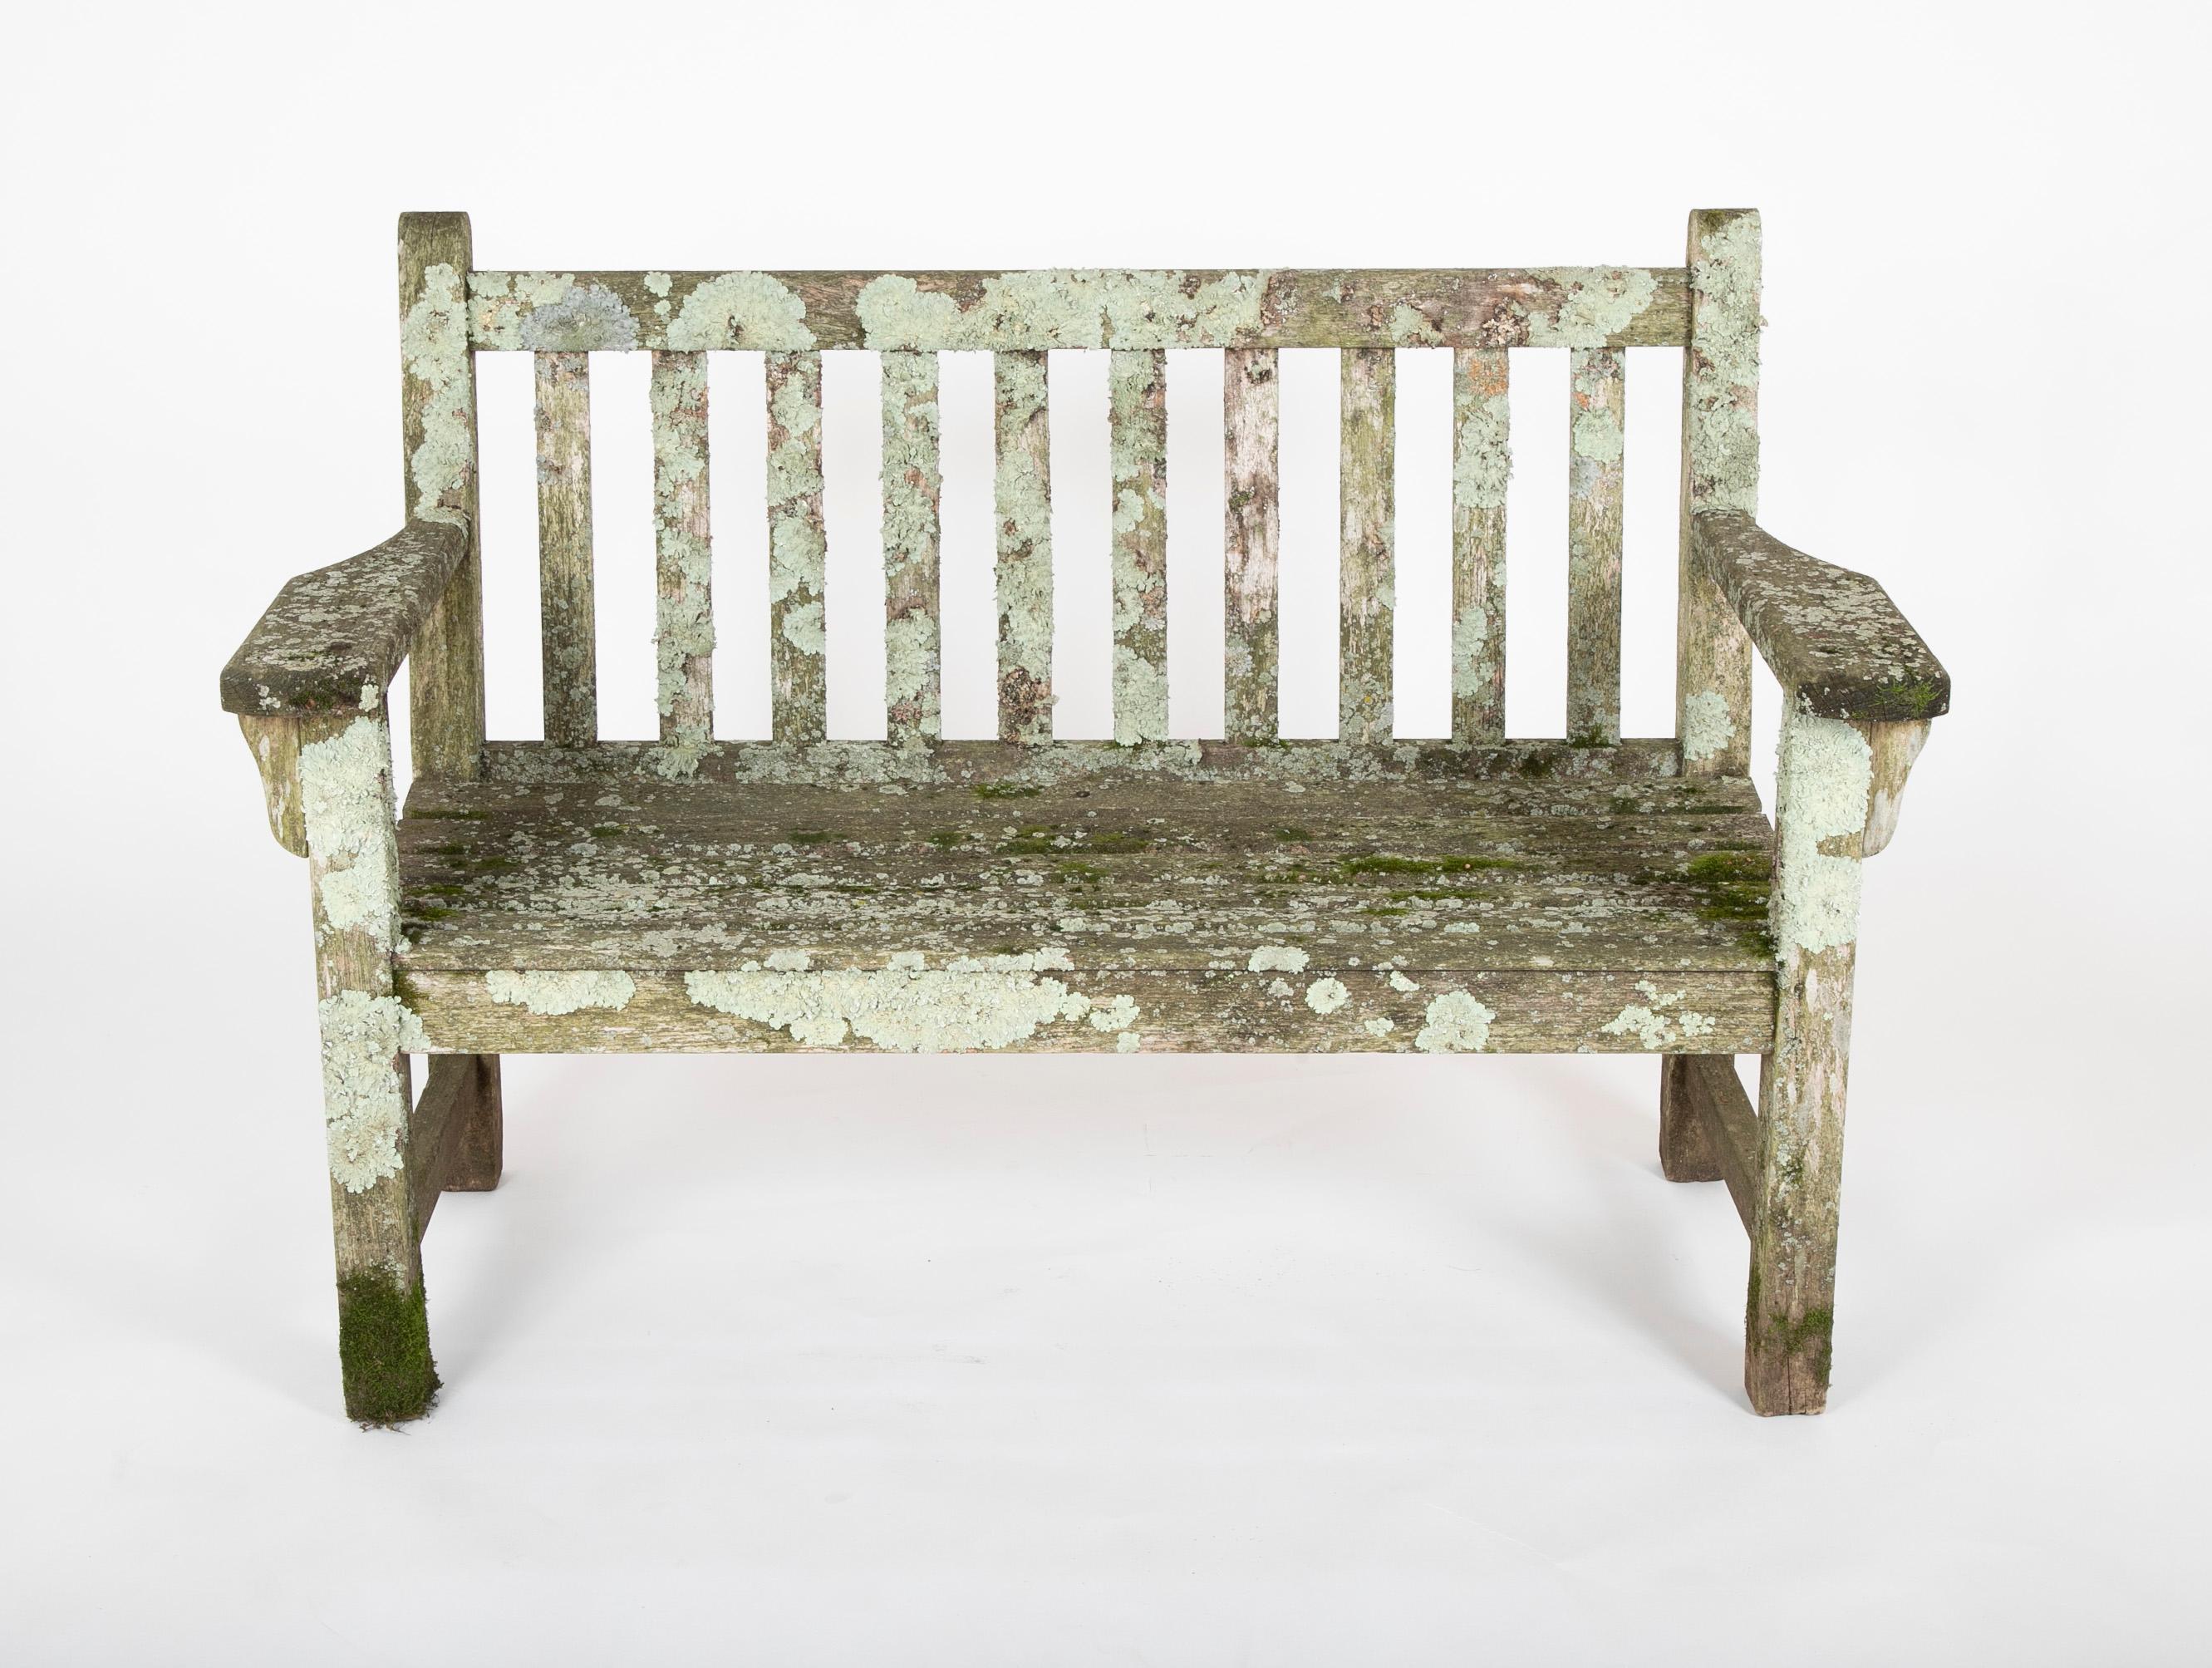 Weathered teak wood bench having fantastic lichen and moss patination.